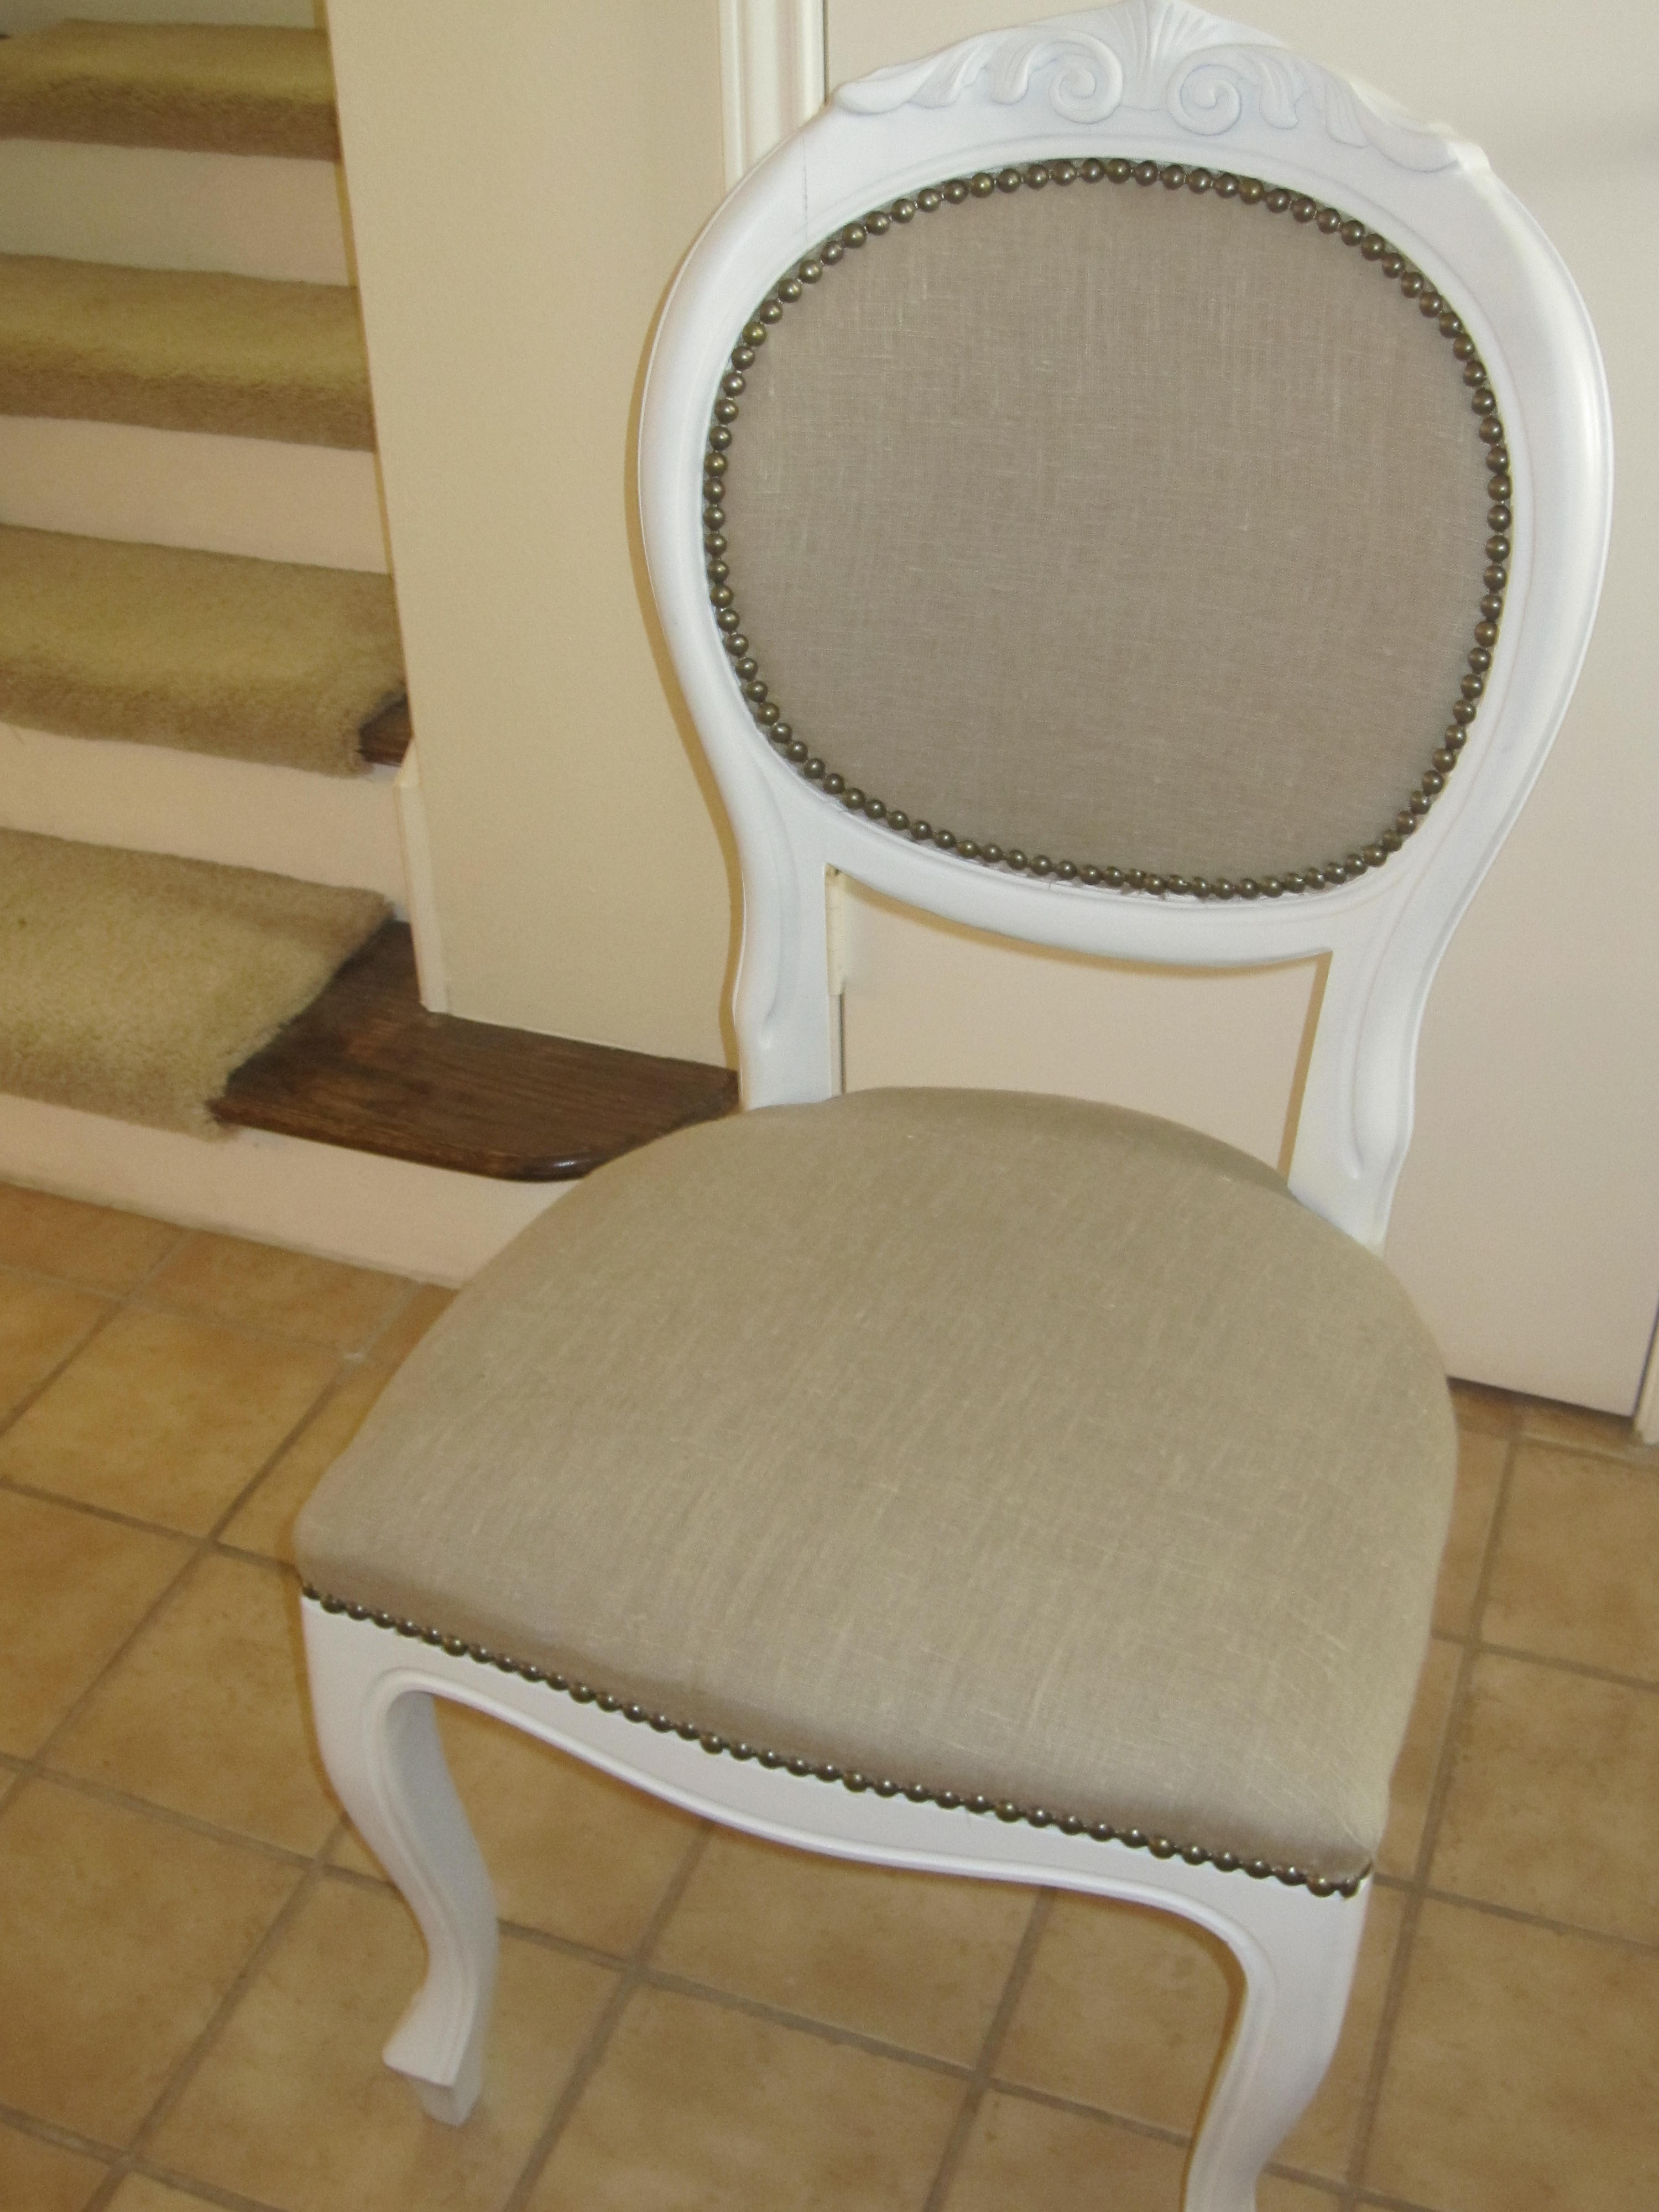 Wholesale Fabric Dining Chairs | Wholesale Dining Room Furniture